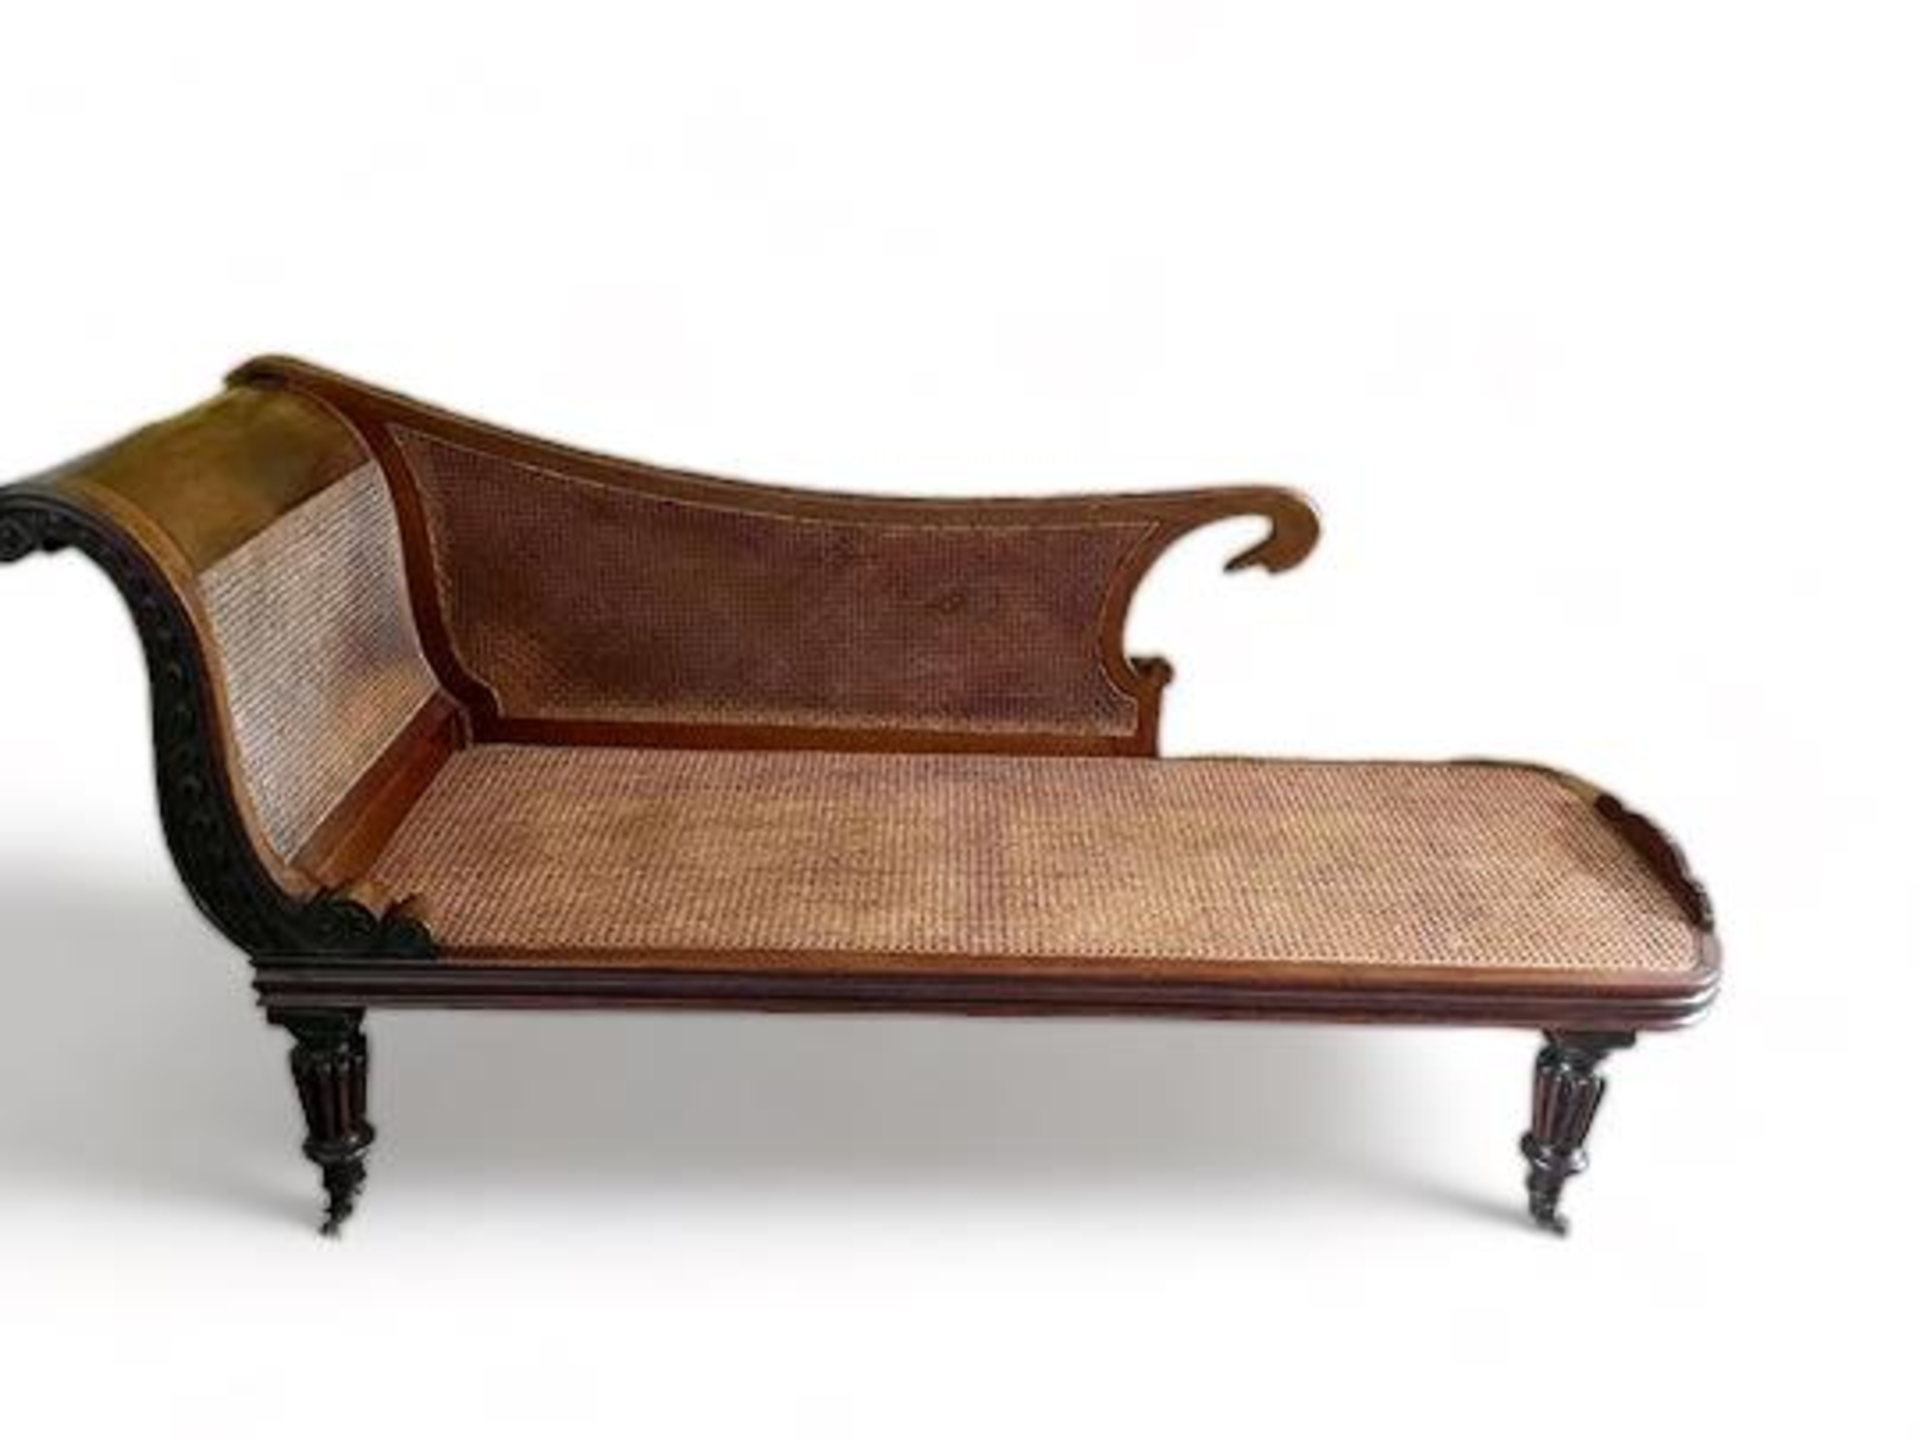 A19th century carved Colonial mahogany day bed - Image 2 of 8